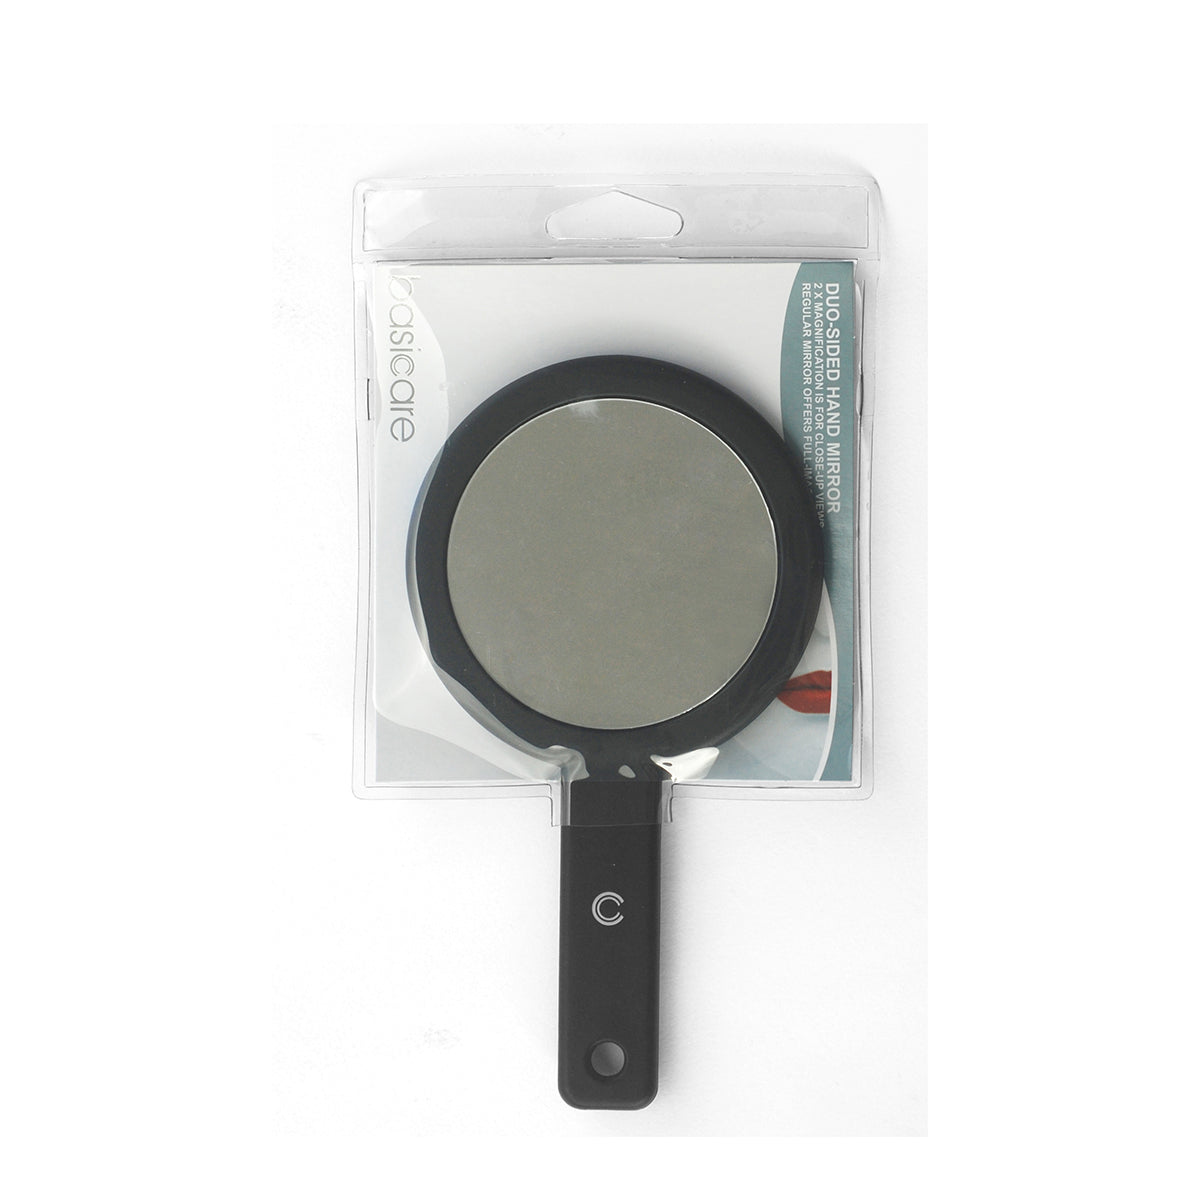 Basicare Duo-Sided Makeup/Shaving Mirror (7616124190944)